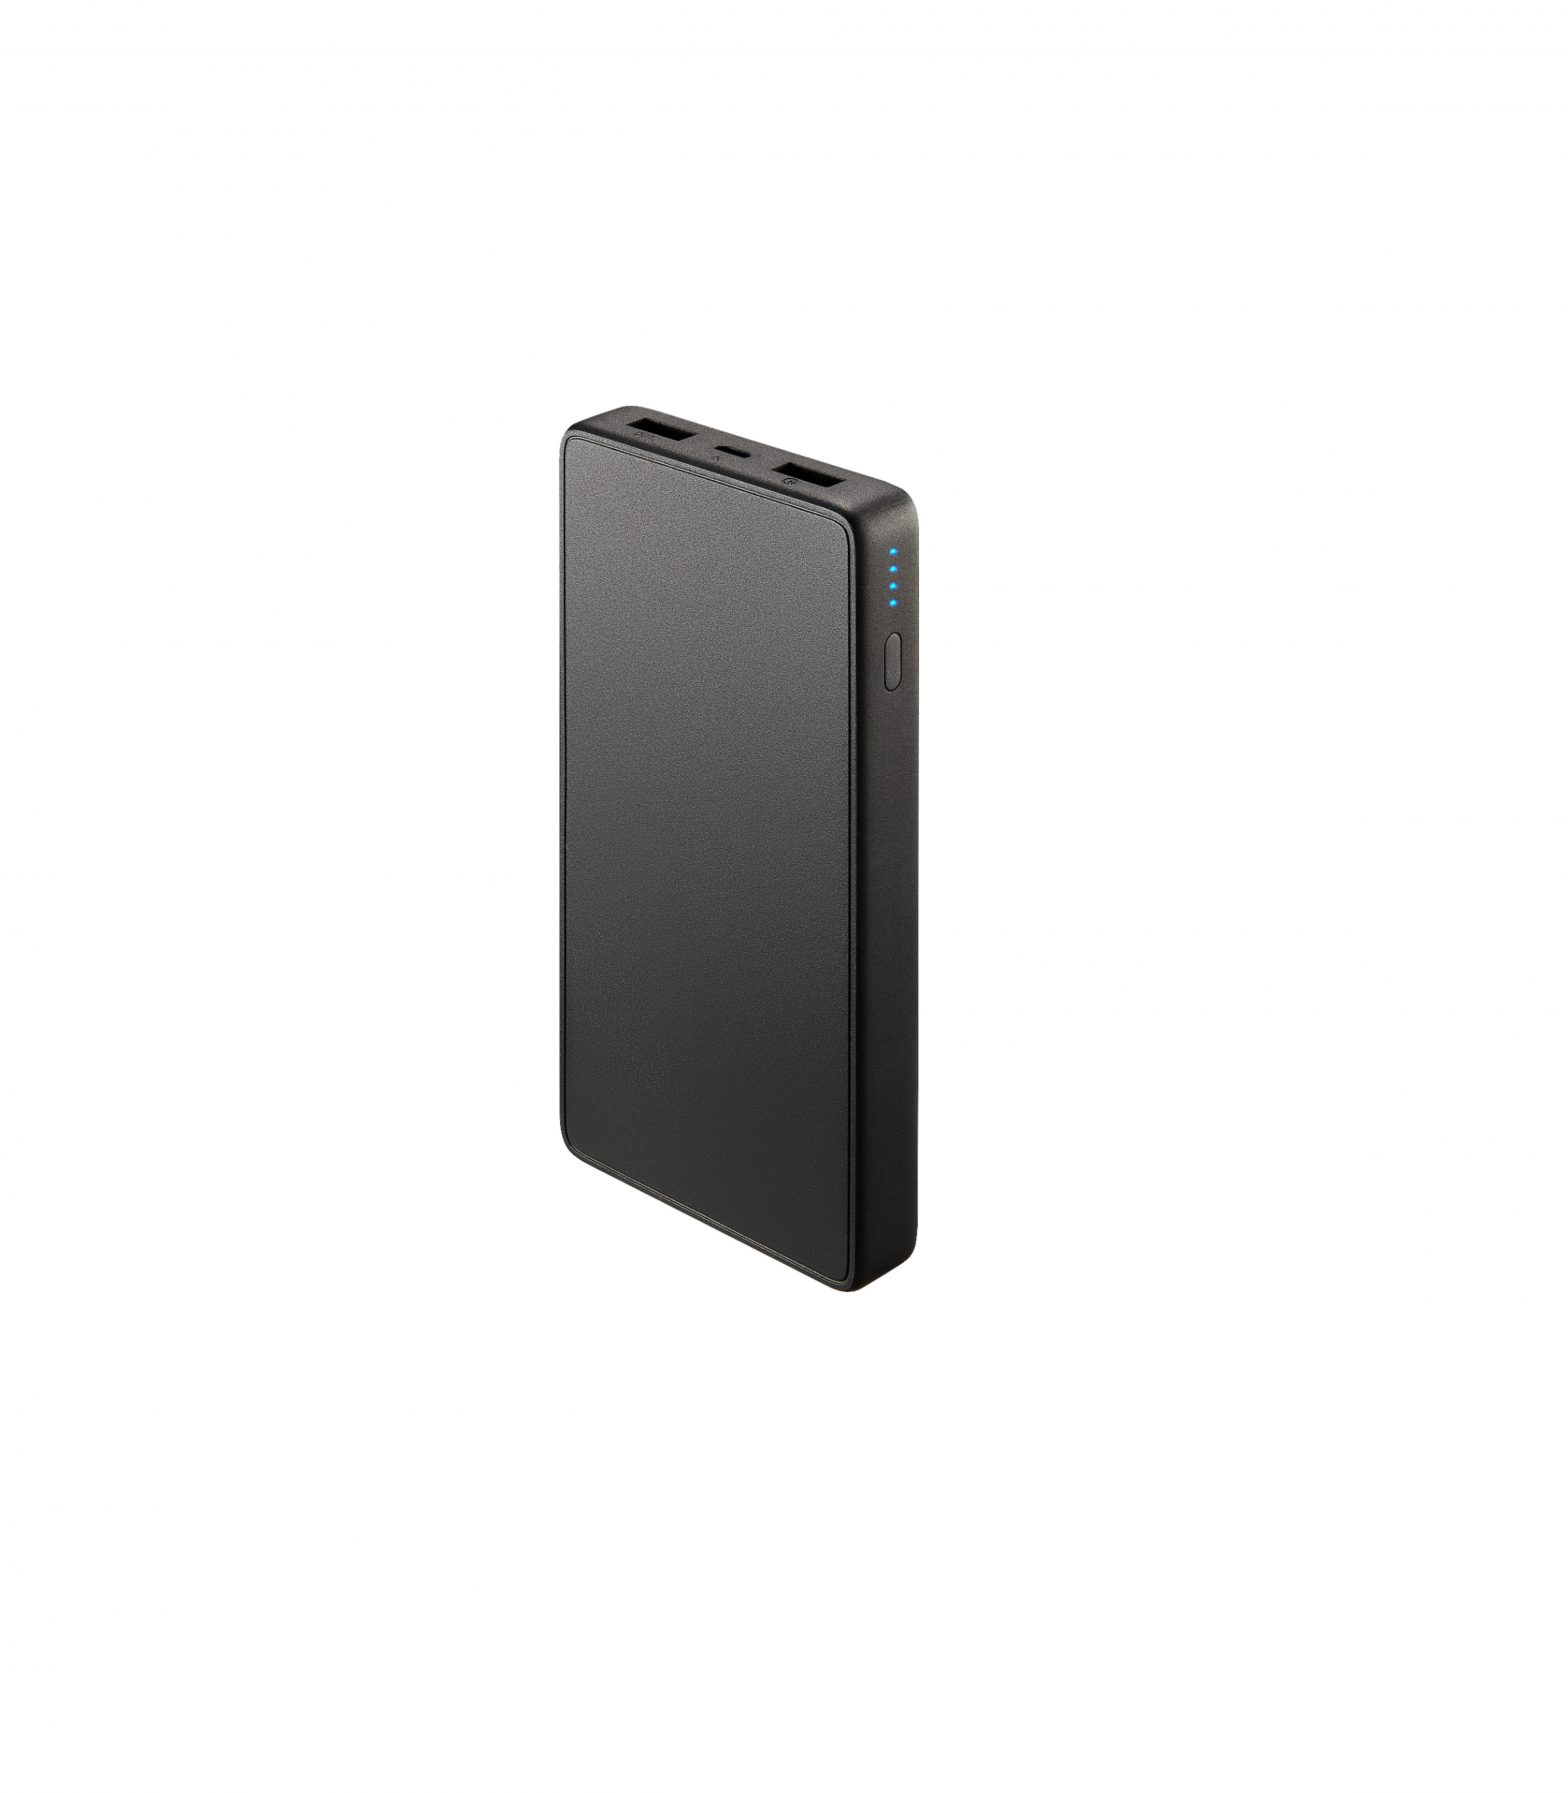 BEST BUY essentials 10000 mAh Portable Battery User Guide